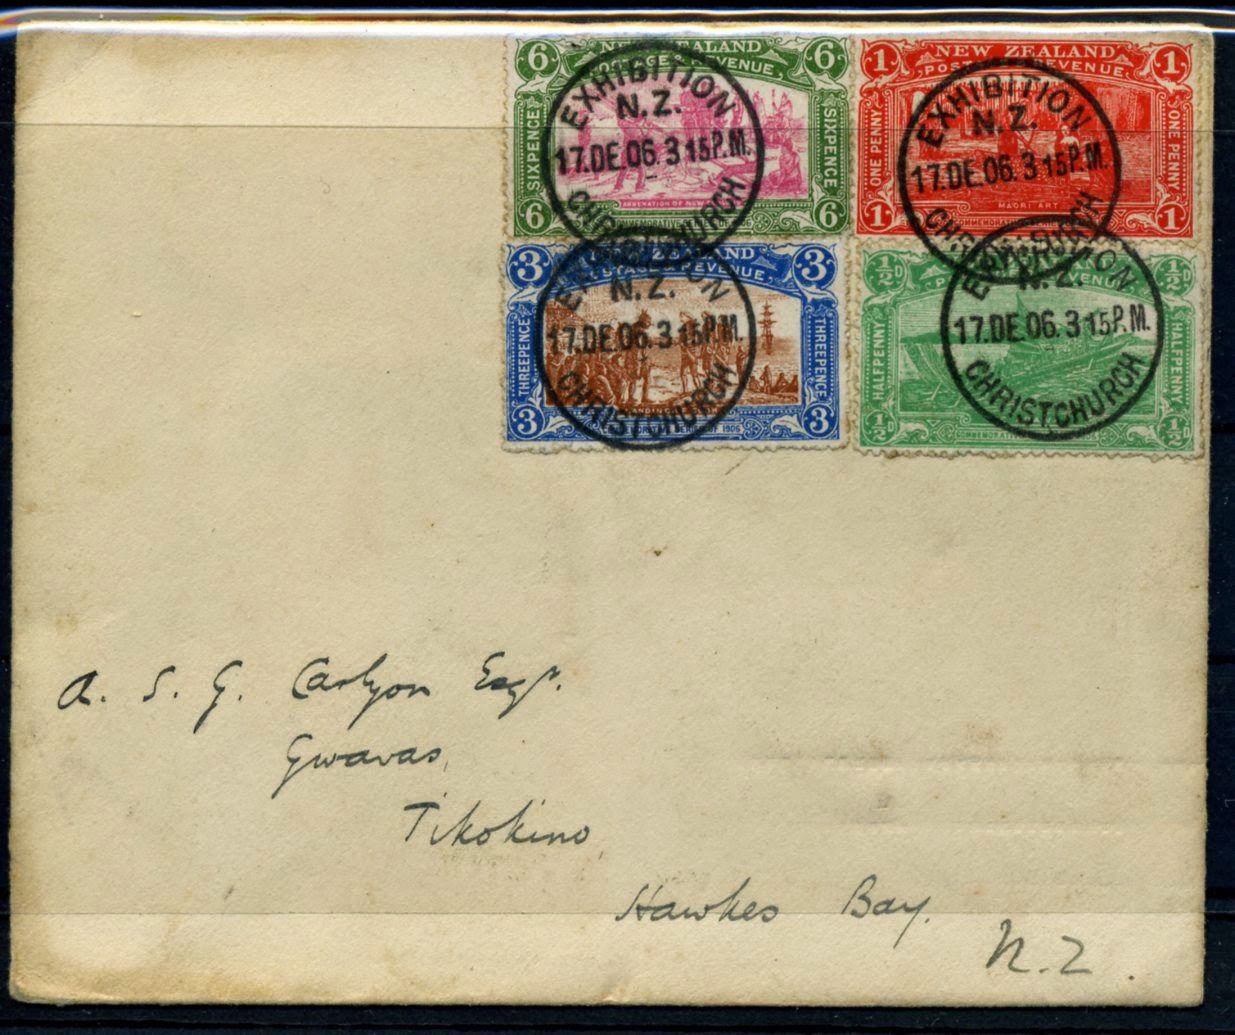 Virtual New Zealand Stamps: 1906 Christchurch Exhibition.